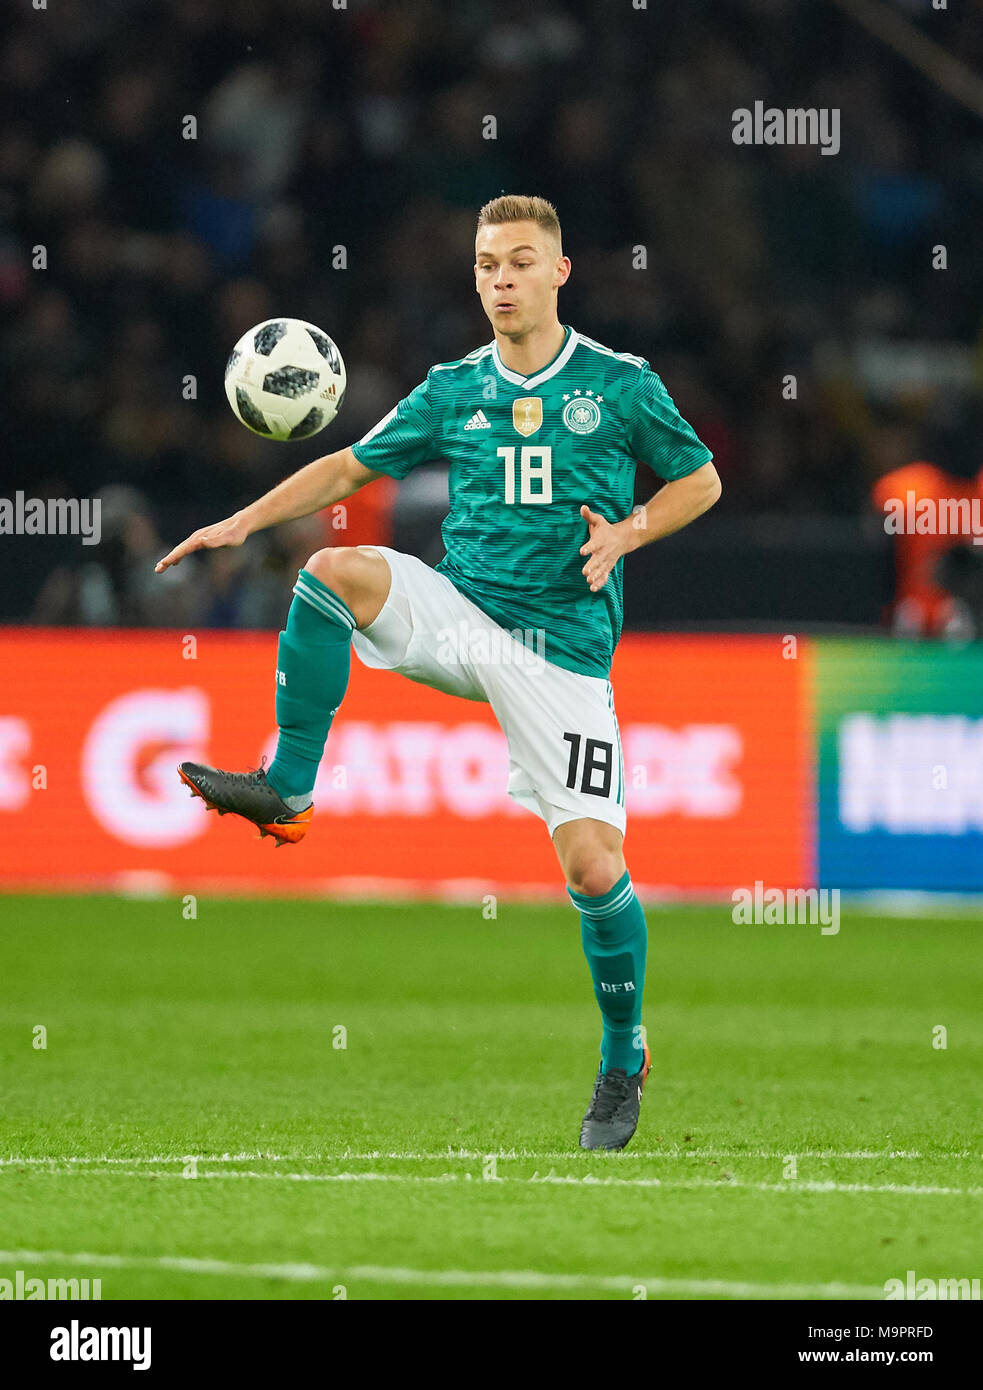 Berlin, Germany. 27th Mar, 2018. DFB-ESP Football Test, Berlin, March 27, 2018 Joshua KIMMICH, DFB 18   drives the ball, action, full-size,  GERMANY - BRASIL 0-1 Soccer World Cup Russia Test match , Berlin, March 27, 2018,  Season 2017/2018  © Peter Schatz / Alamy Live News Stock Photo